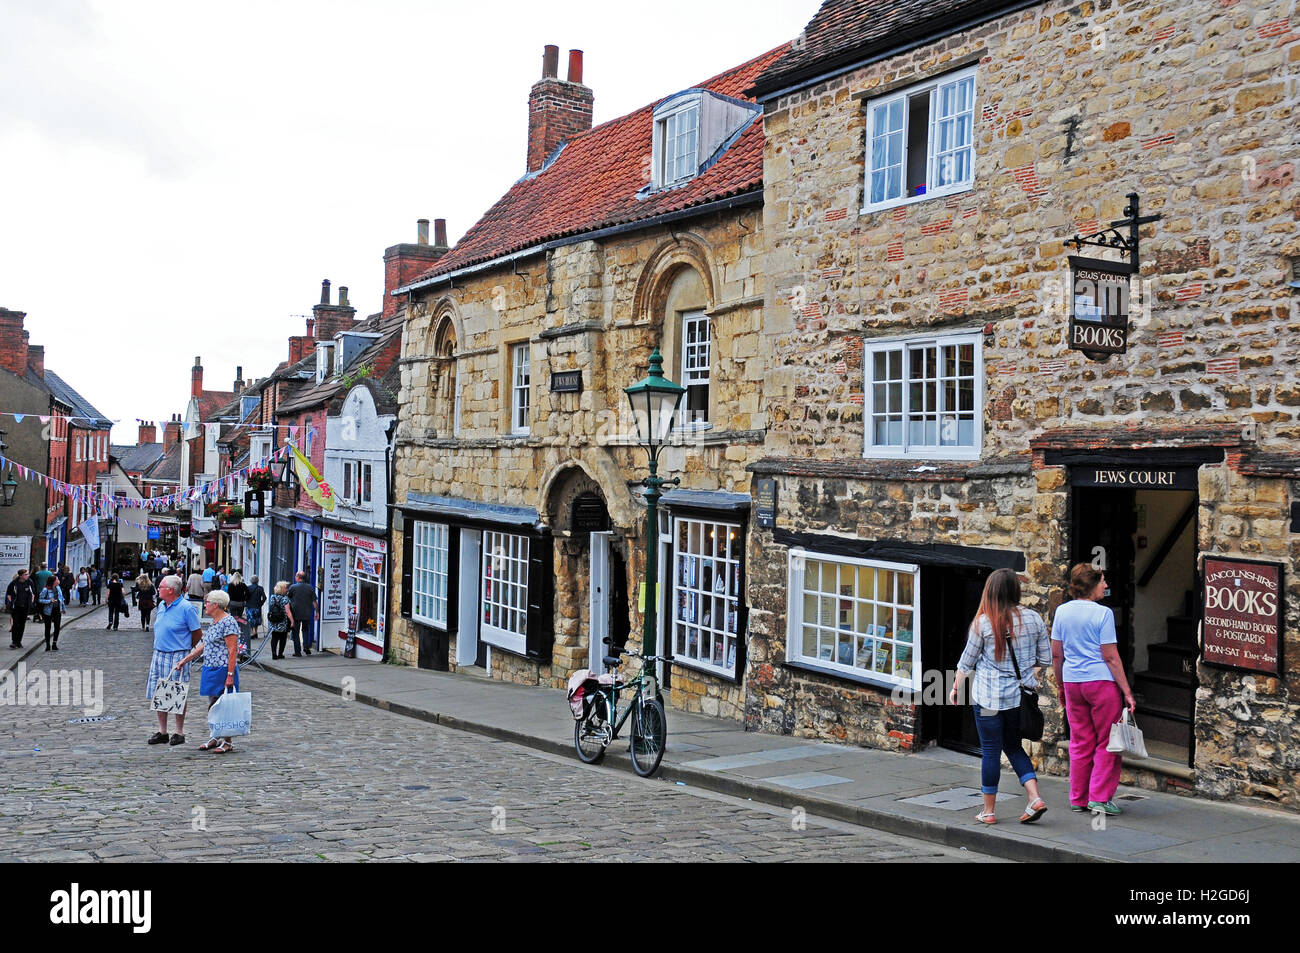 The Jew's House and Jews Court on Steep Hill Lincoln. Stock Photo